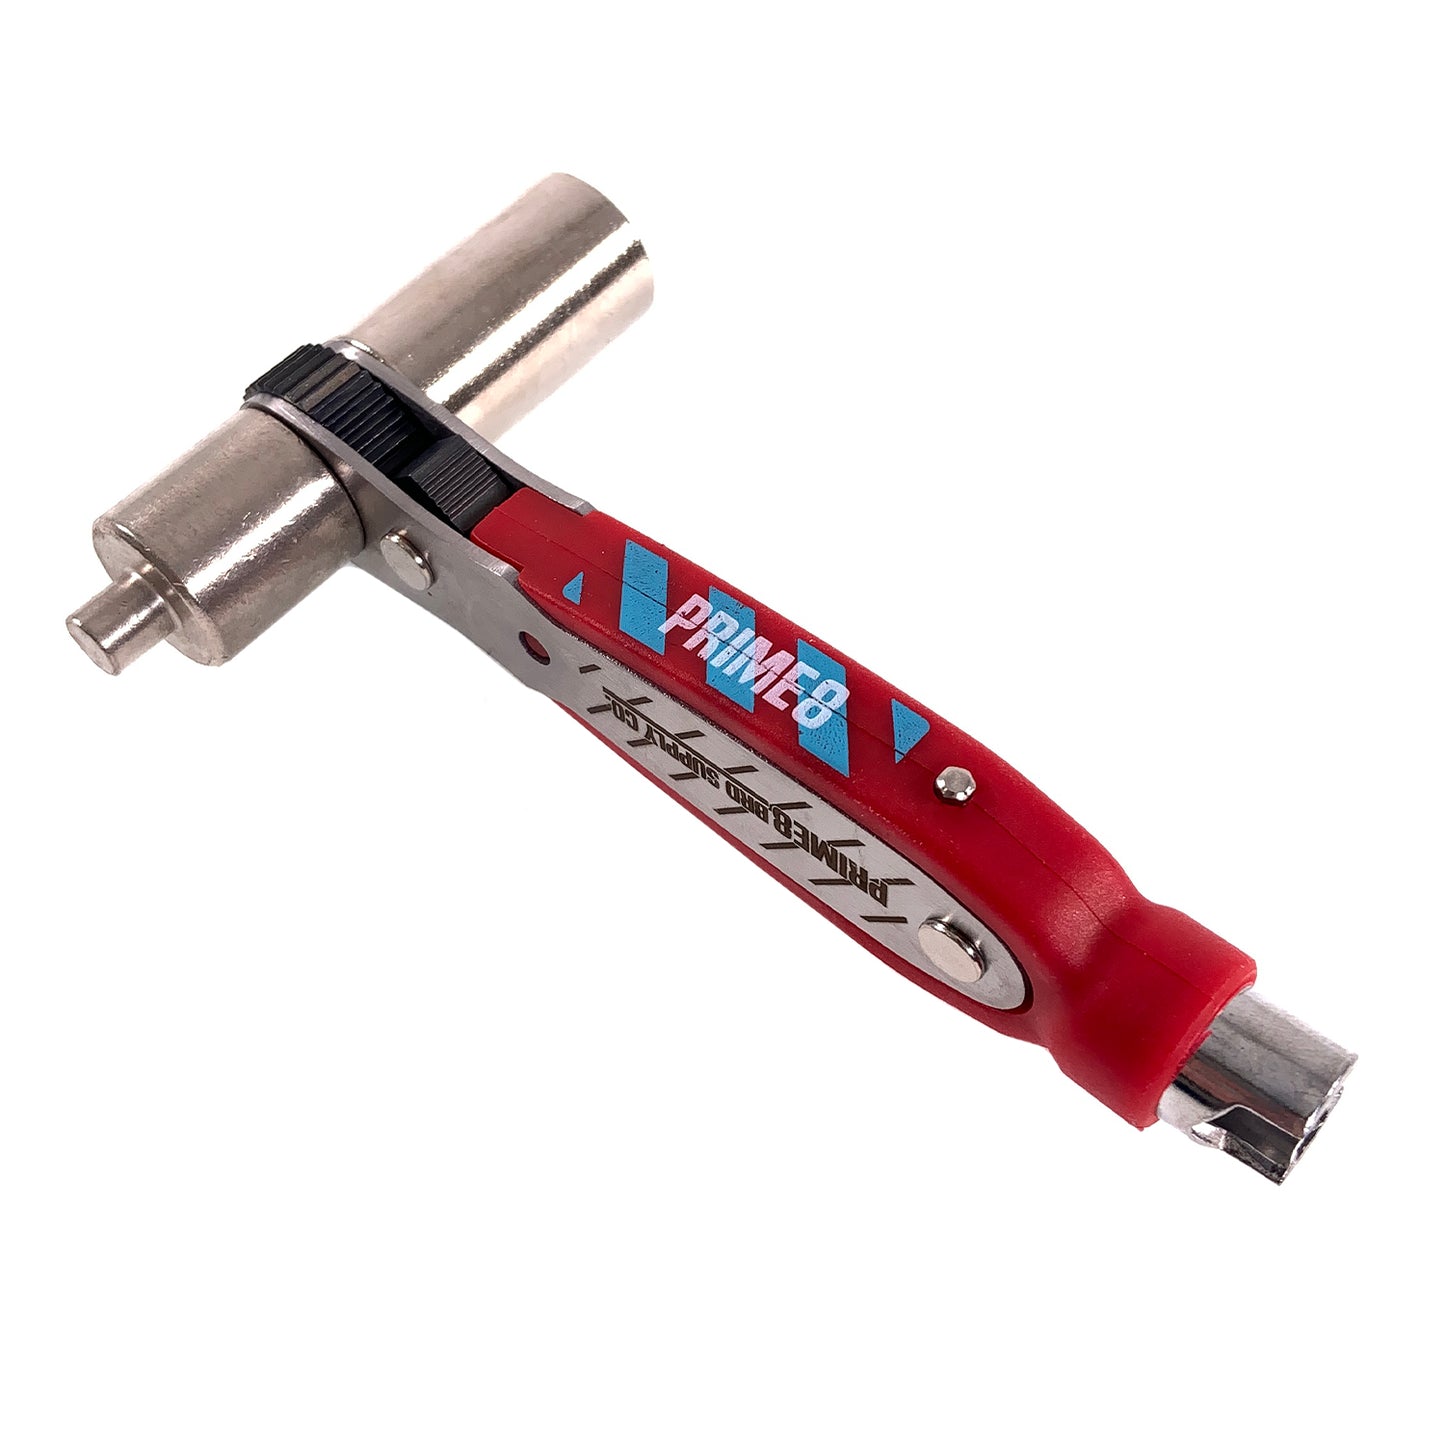 Prime8 #1 Ratchet Tool - Red - Prime Delux Store